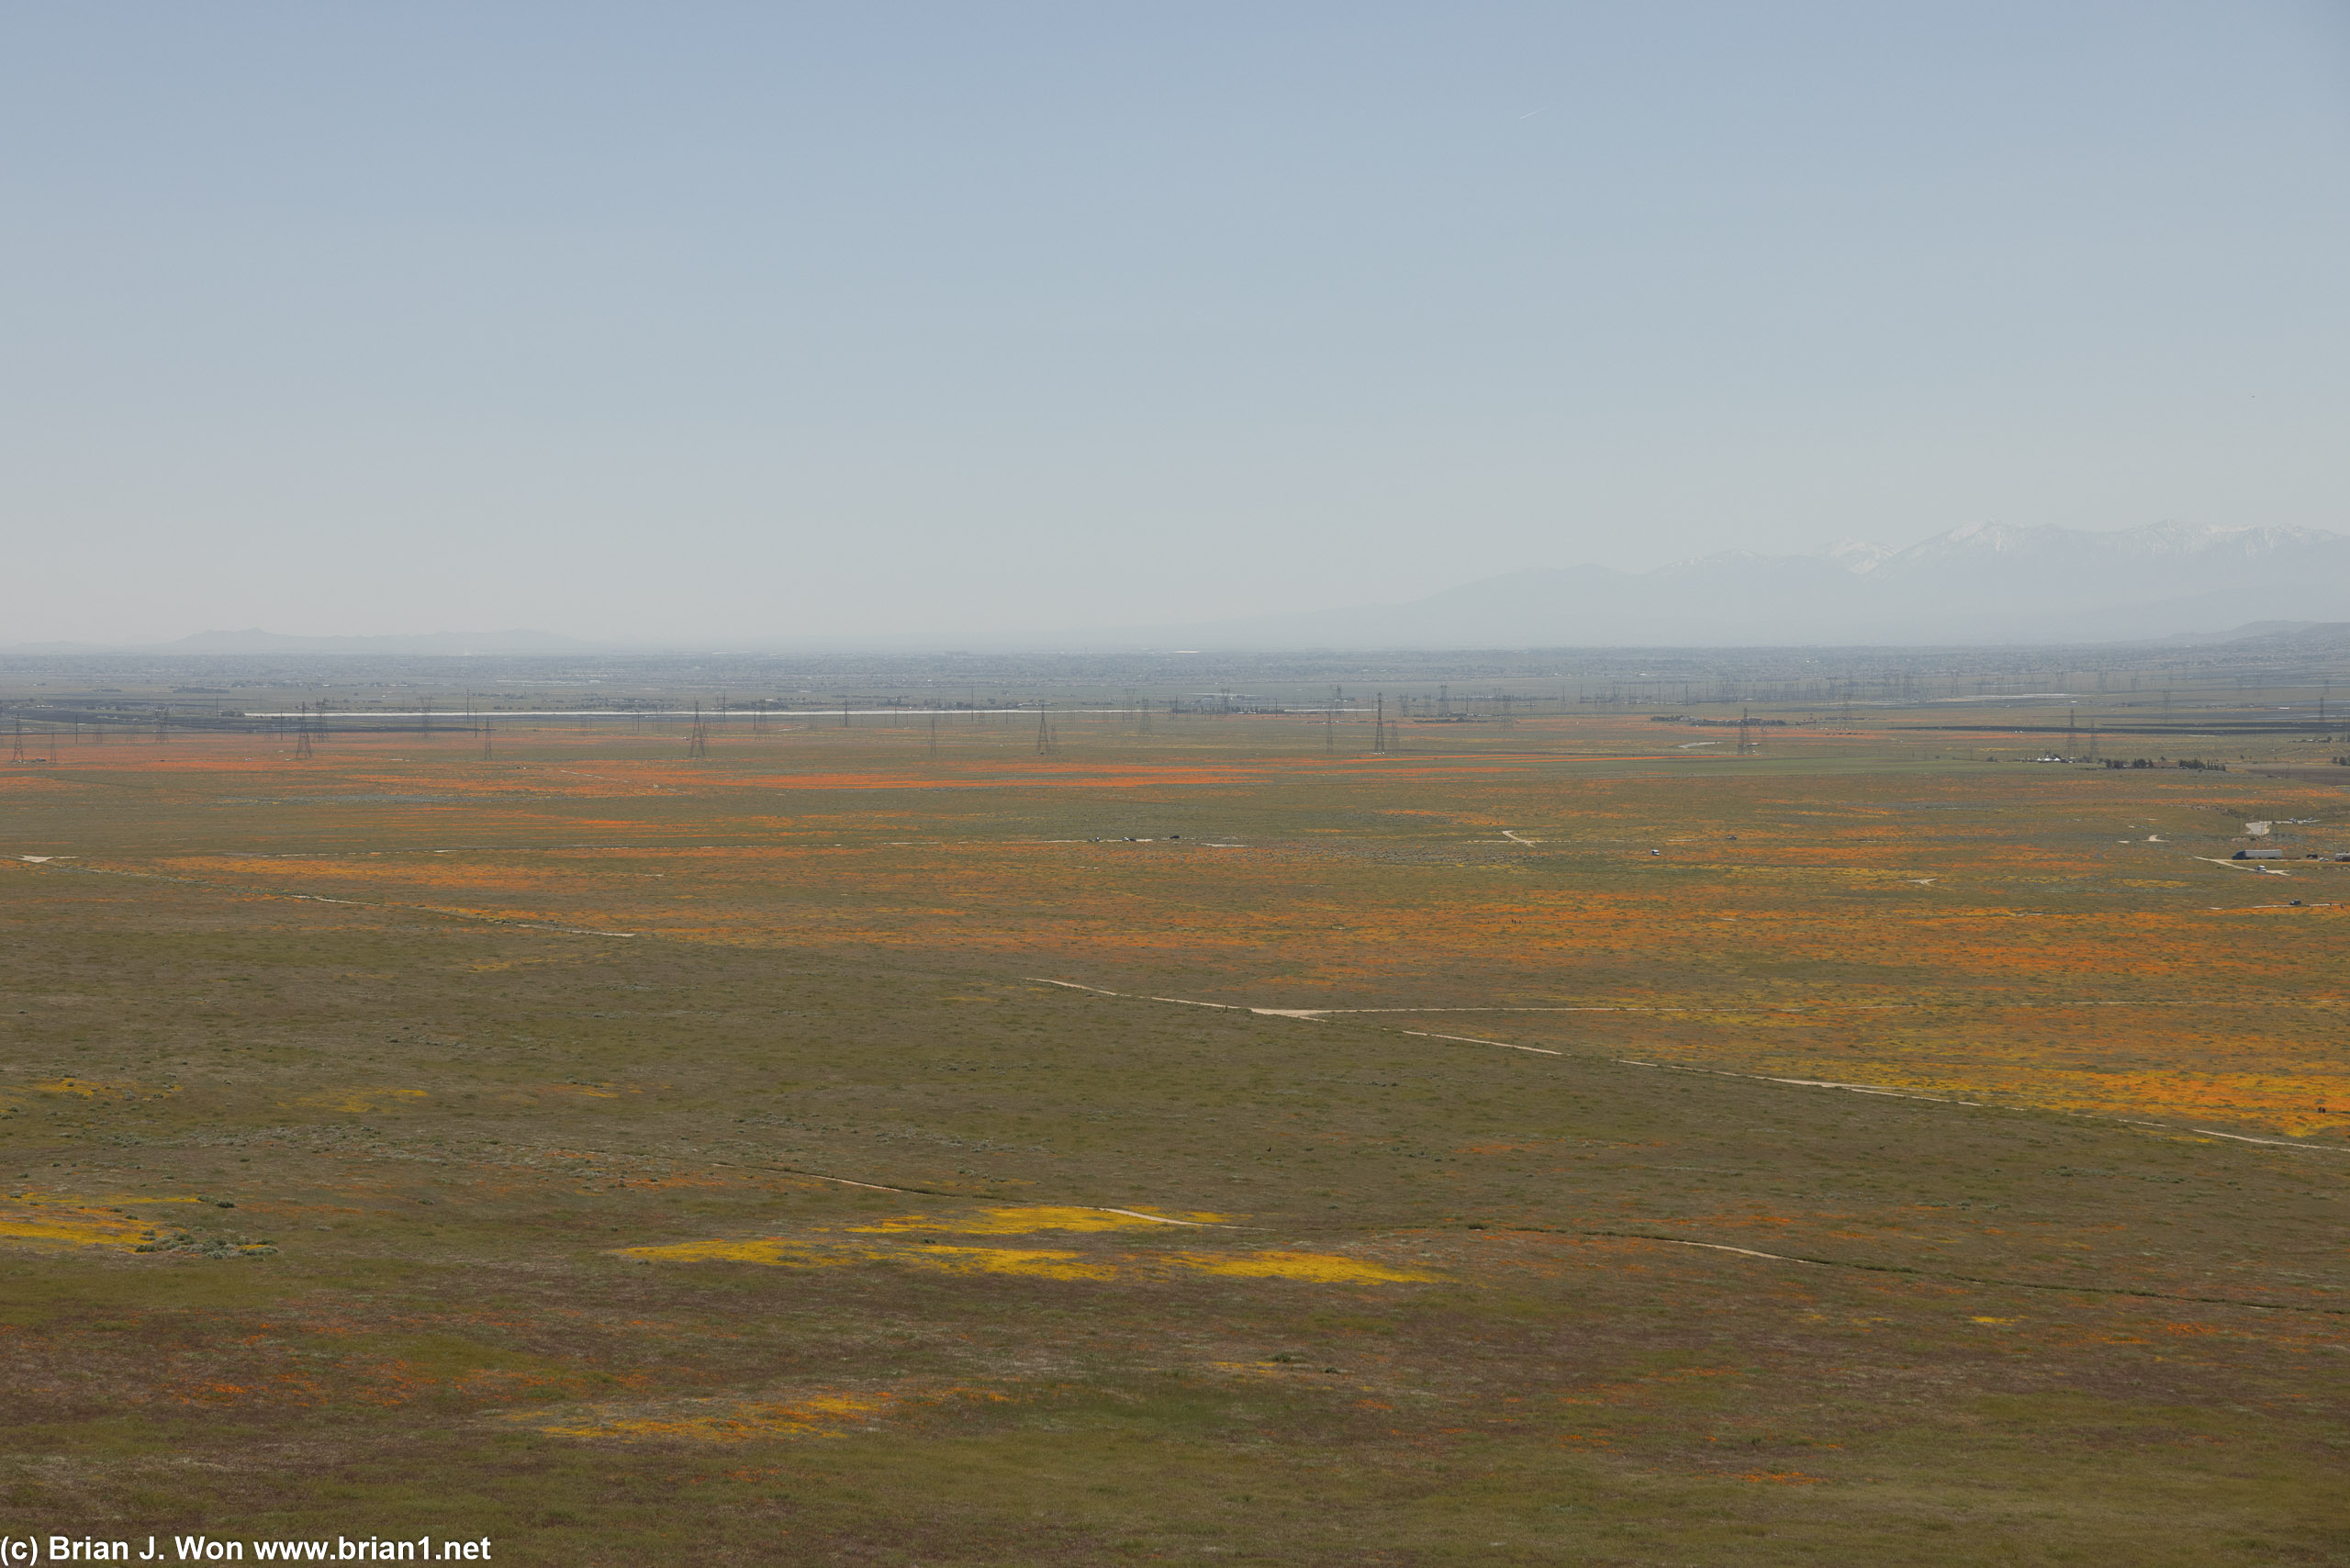 There are some fields of poppies outside of the reserve, but no superbloom either.